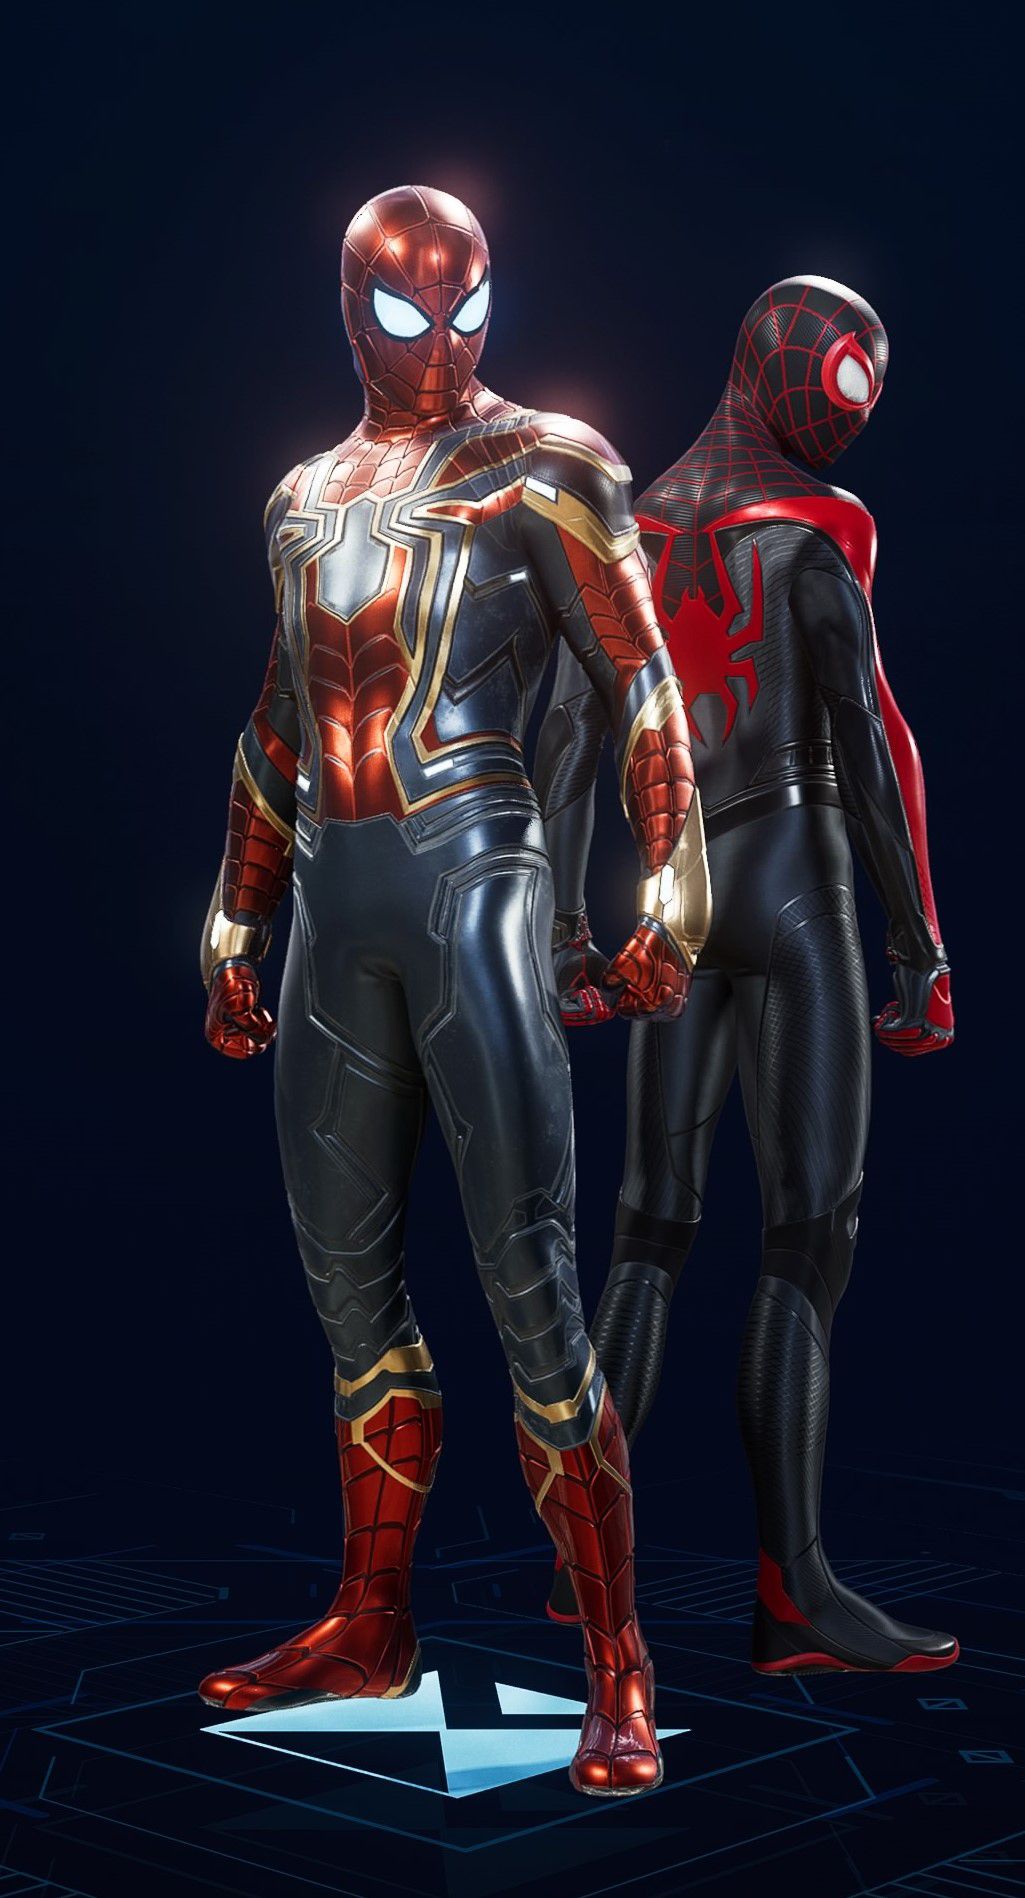 Peter Parker stands in his Iron Spider Suit in the suit selection screen of Spider-Man 2.